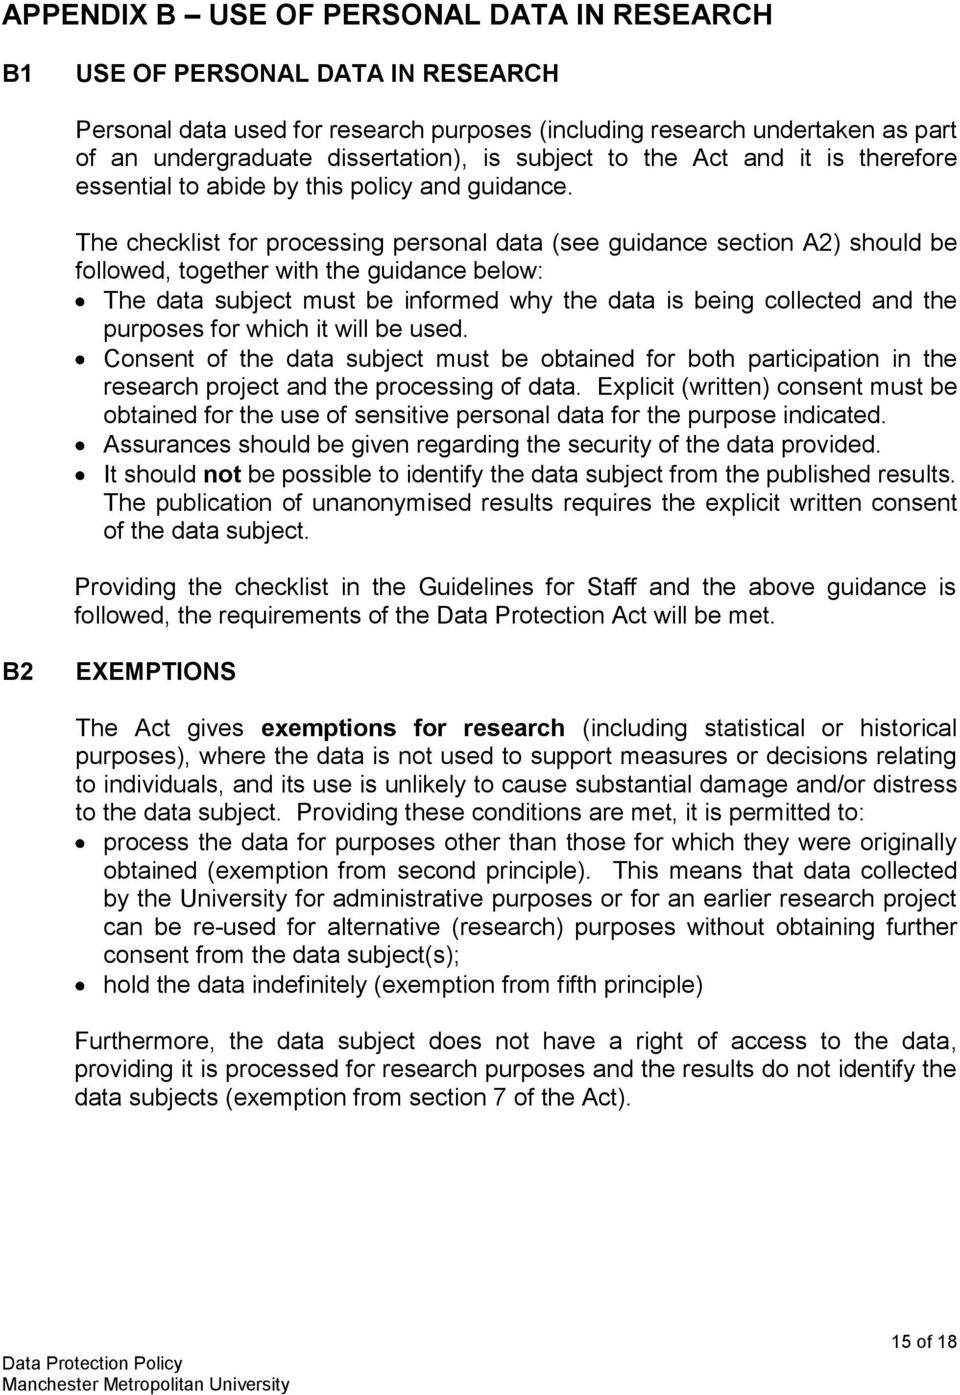 The checklist for processing personal data (see guidance section A2) should be followed, together with the guidance below: The data subject must be informed why the data is being collected and the